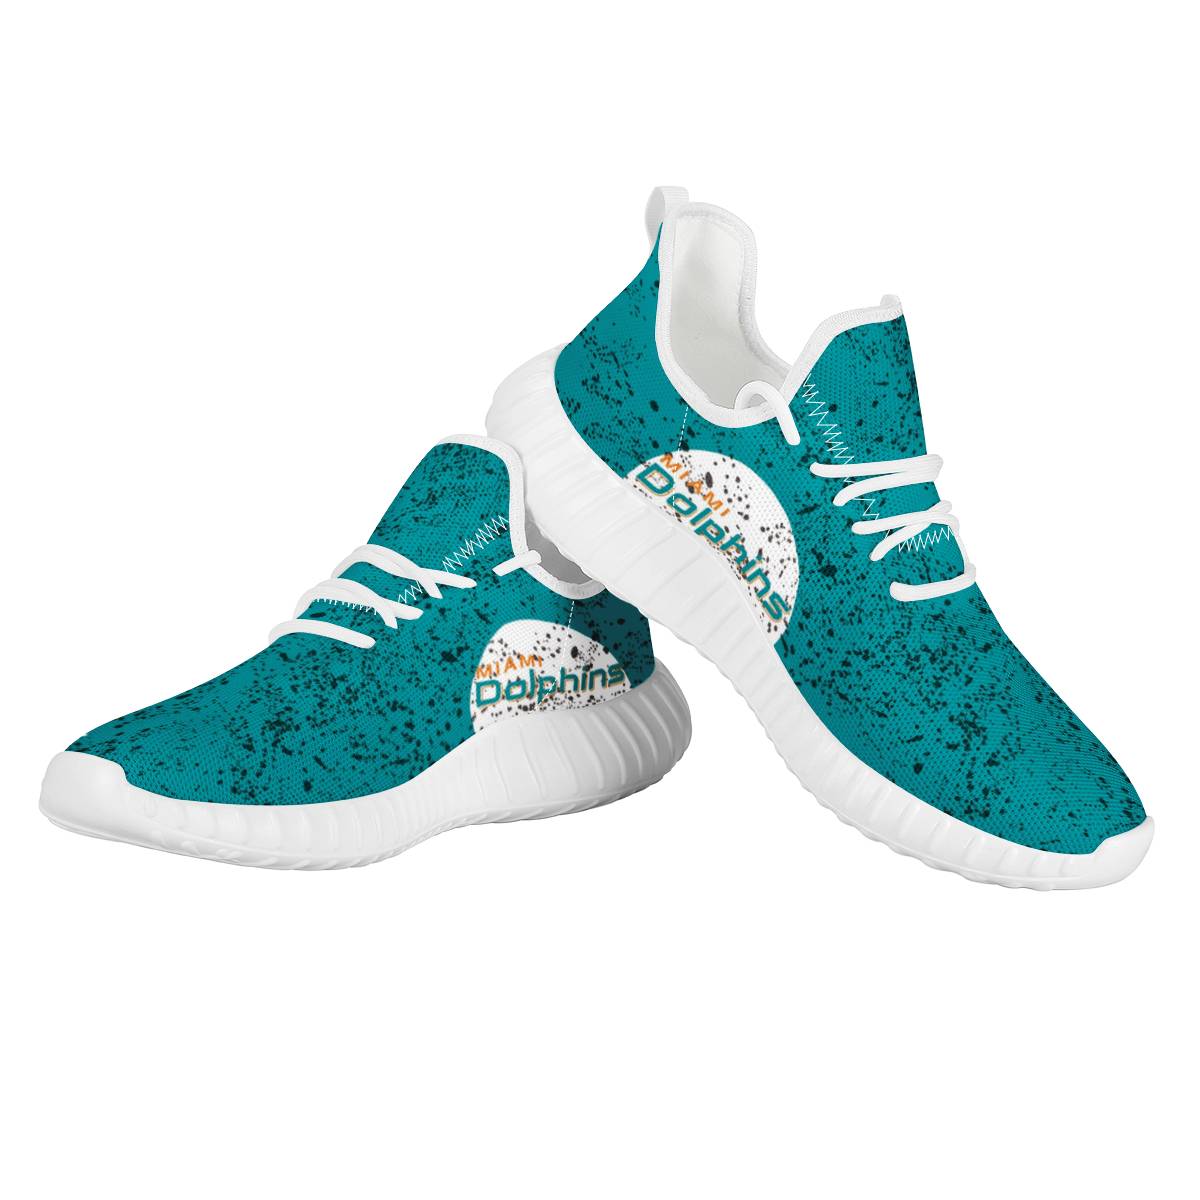 Men's Miami Dolphins Mesh Knit Sneakers/Shoes 016